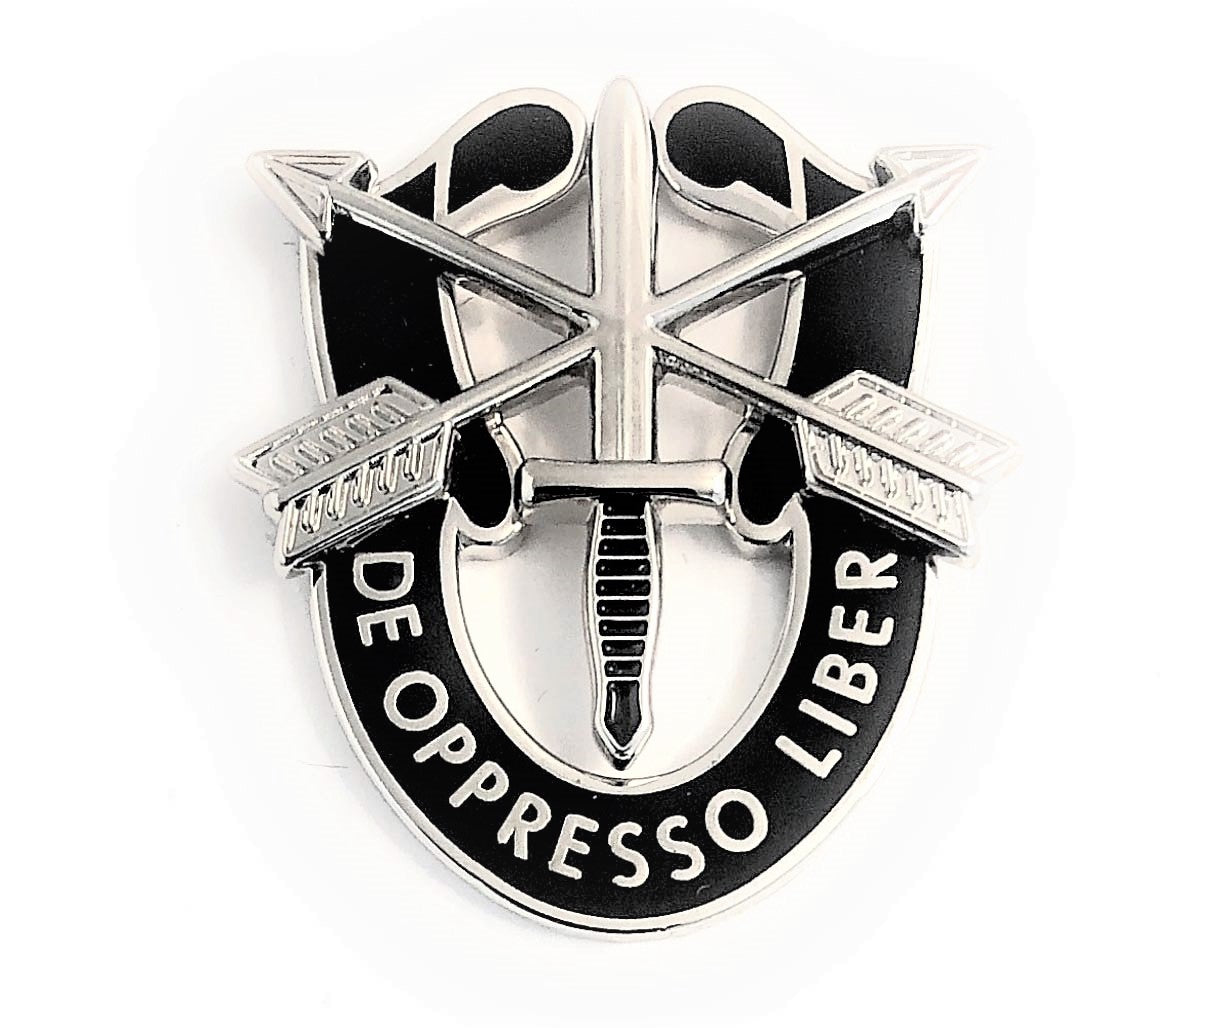 U.S. Army Special Forces Crest (each).